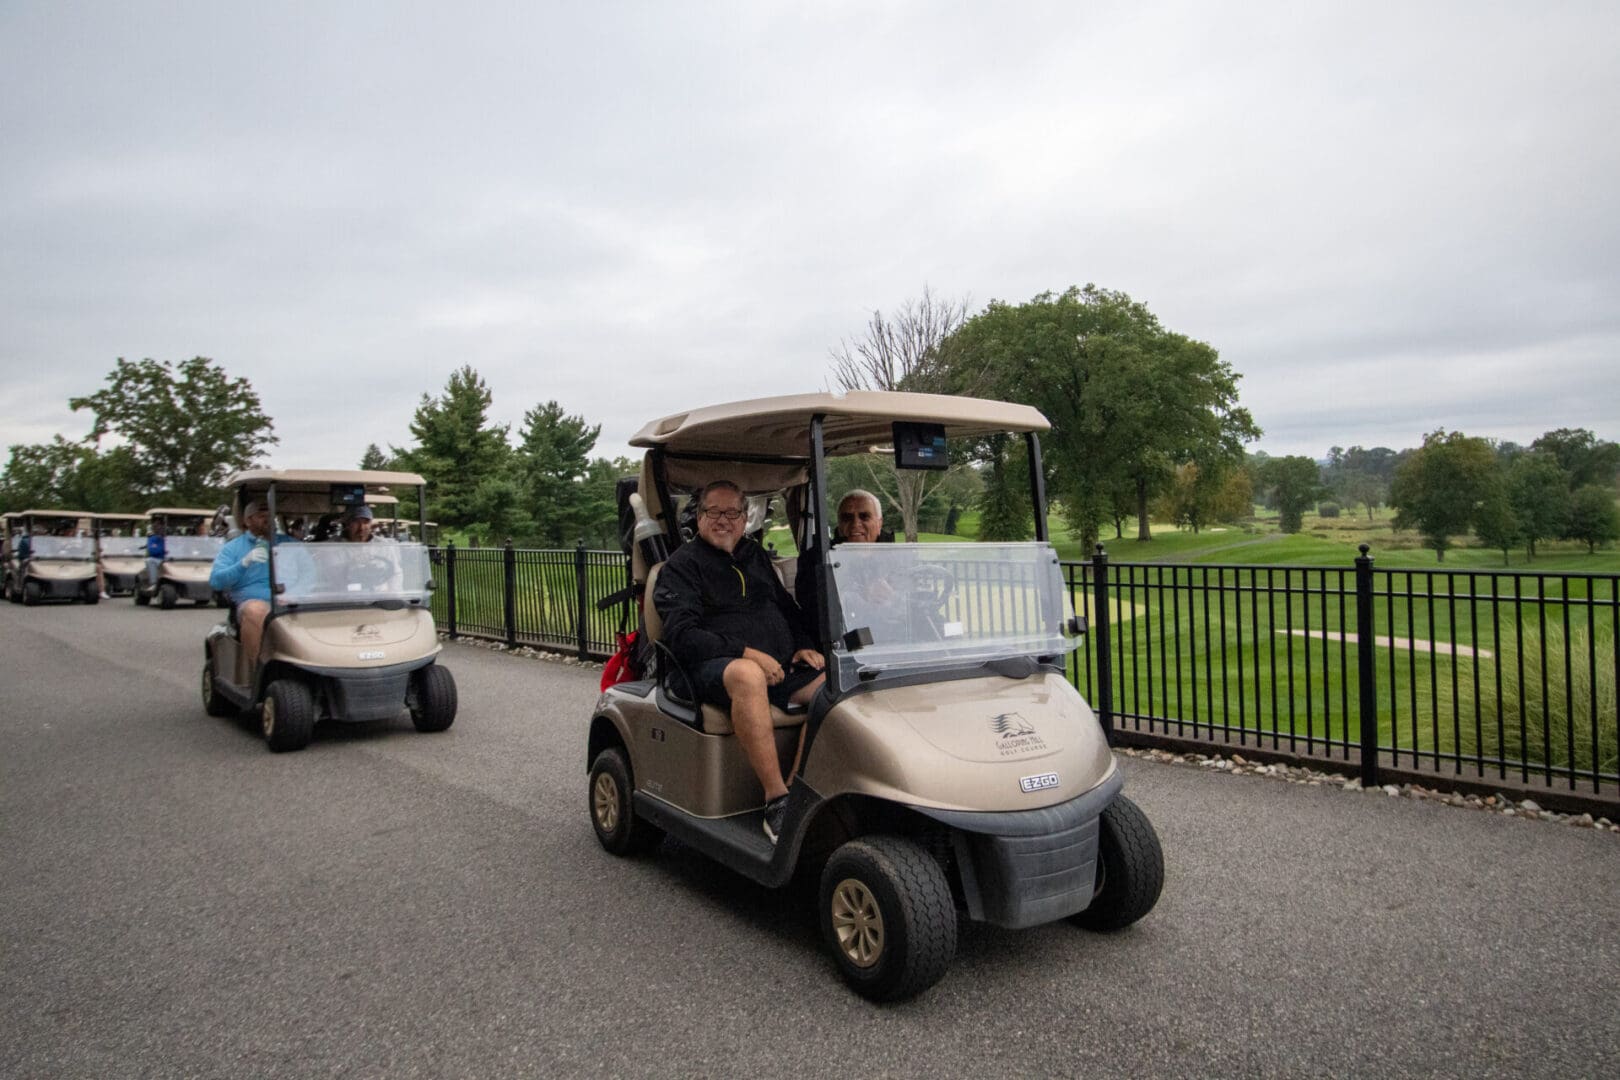 A group of people riding golf carts on a golf course.